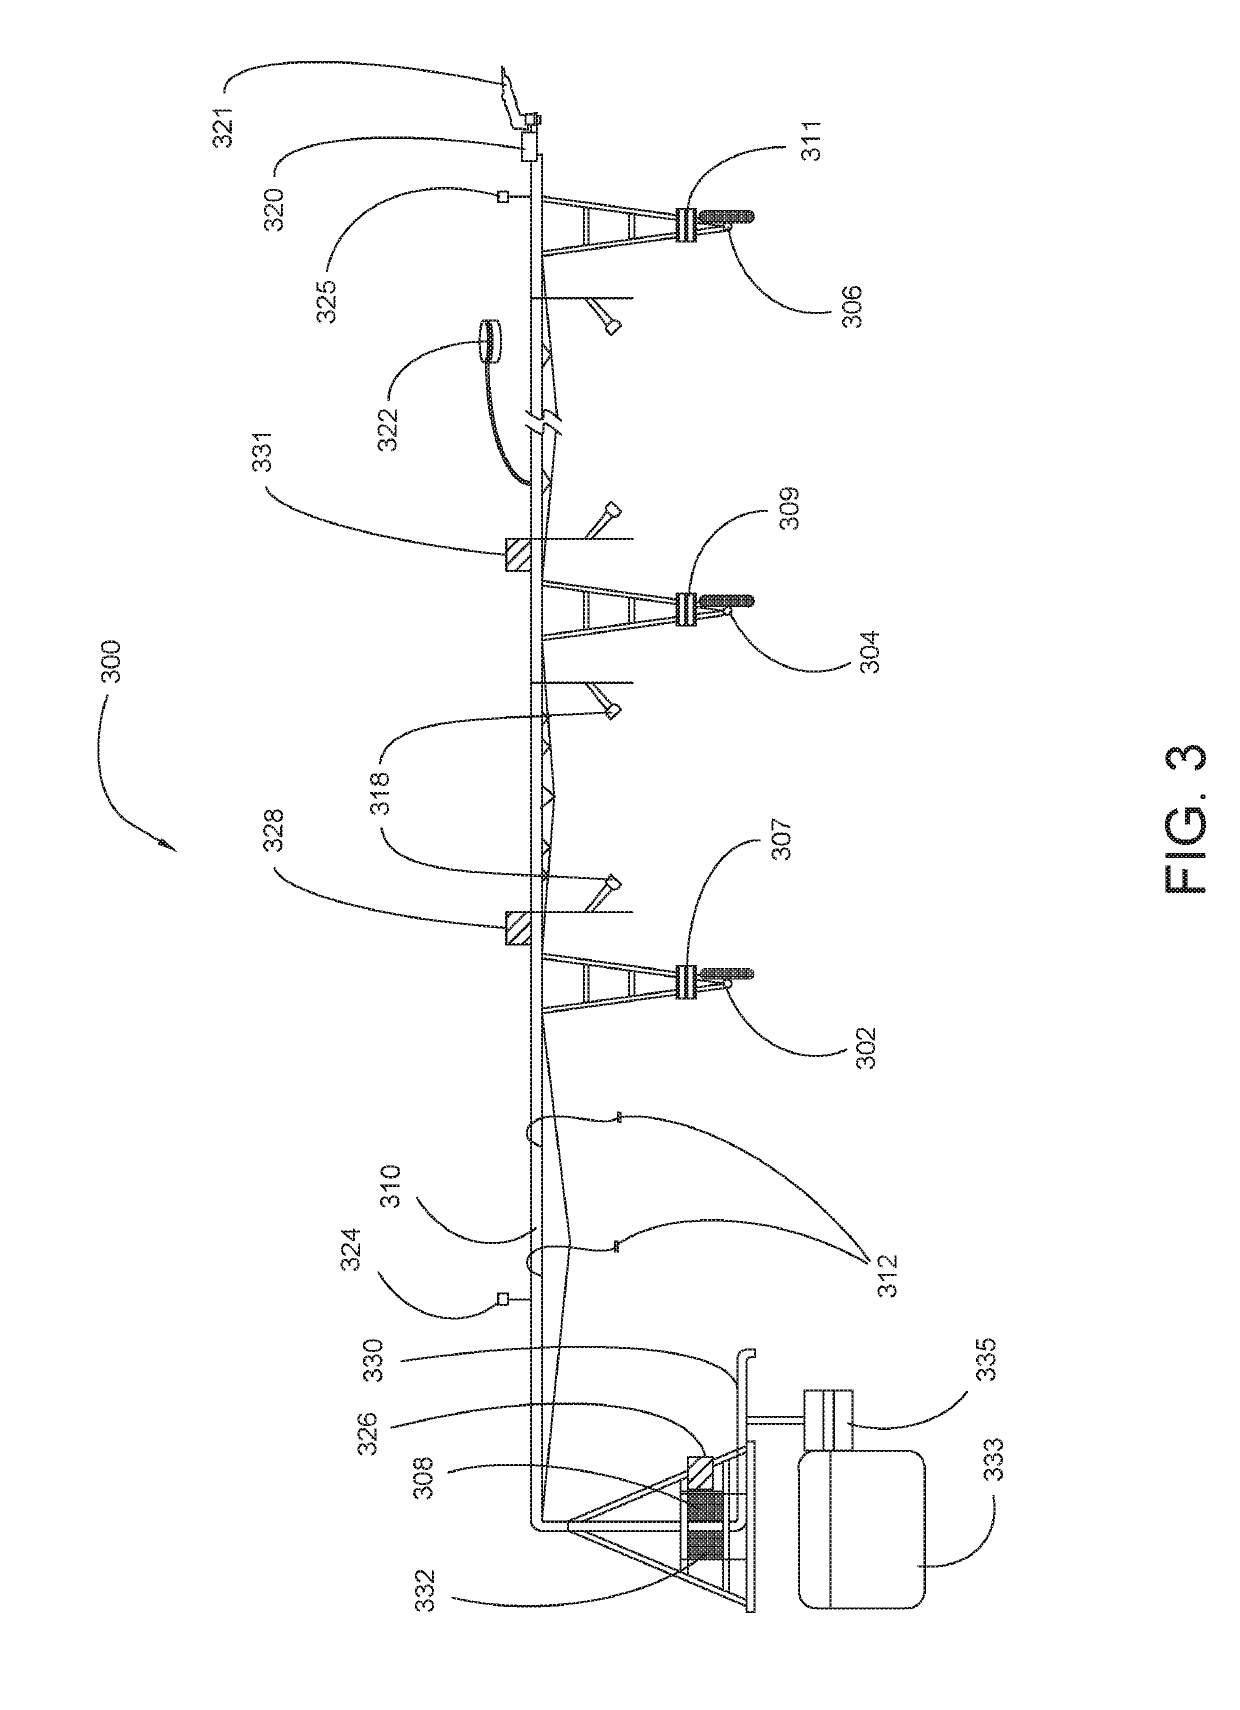 System and method for integrated use of field sensors for dynamic management of irrigation and crop inputs